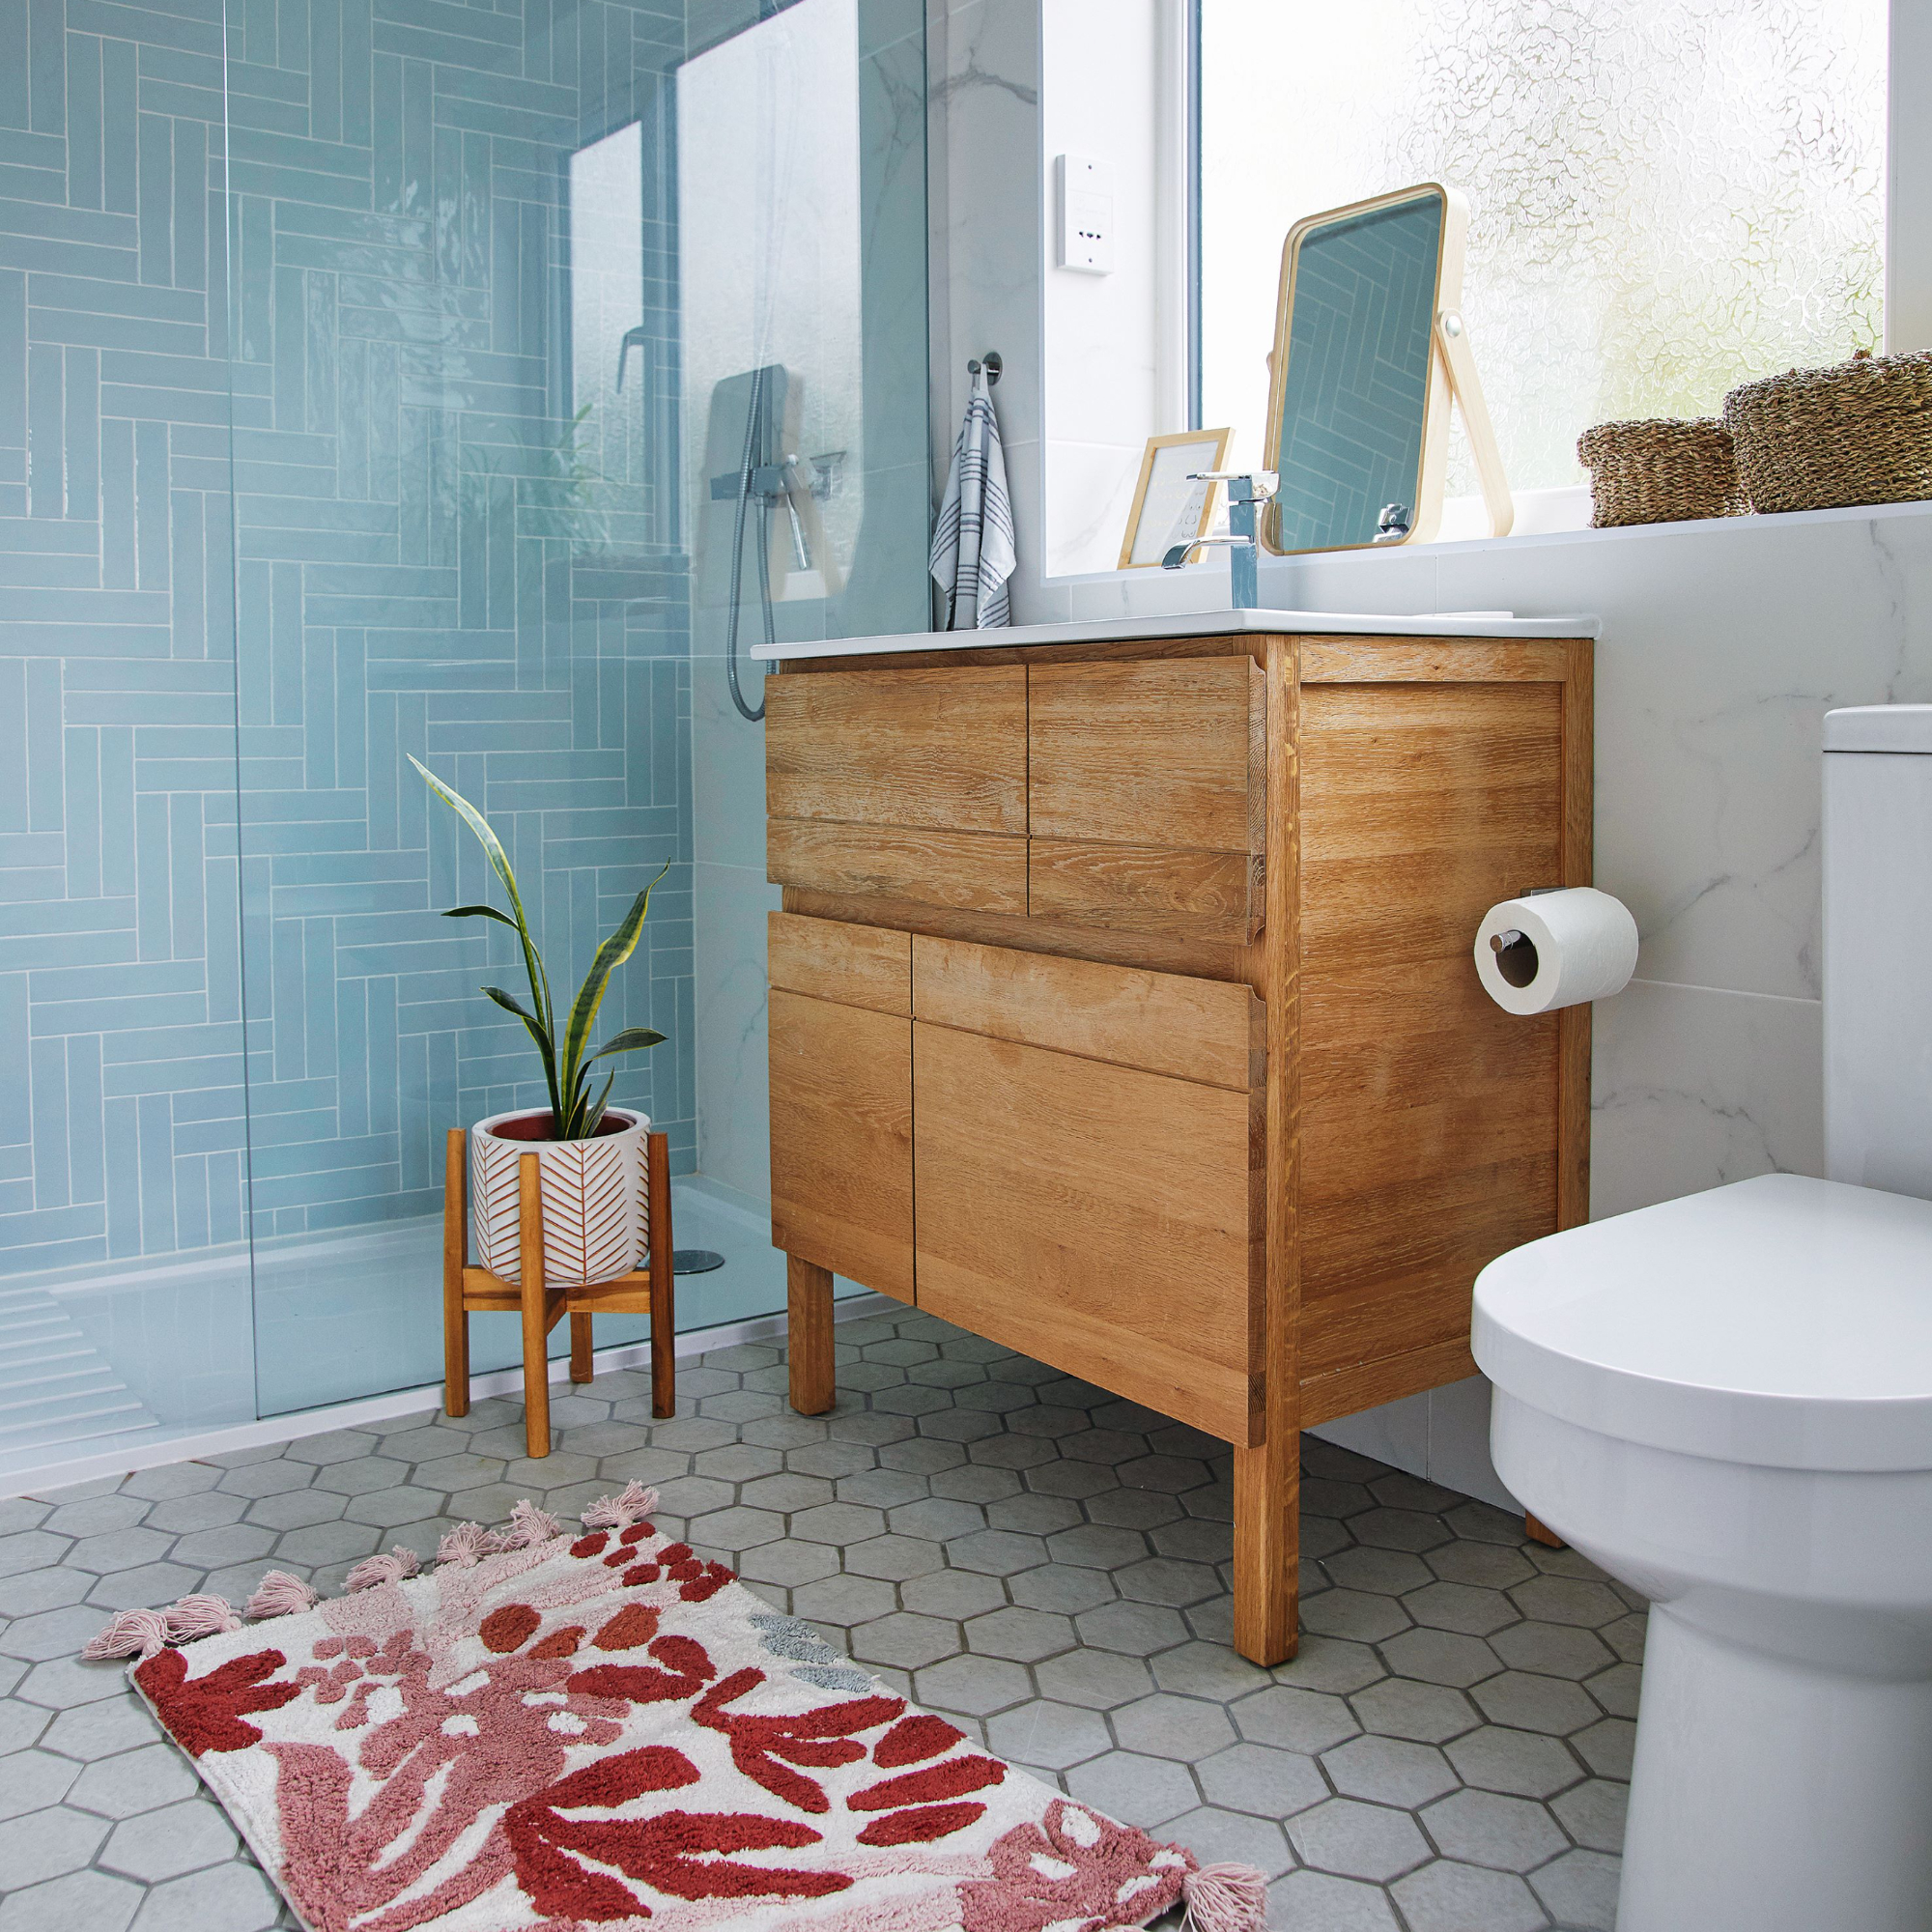 Blue and marble tiled bathroom walls with tiled floor, pink bath mat and wooden sink